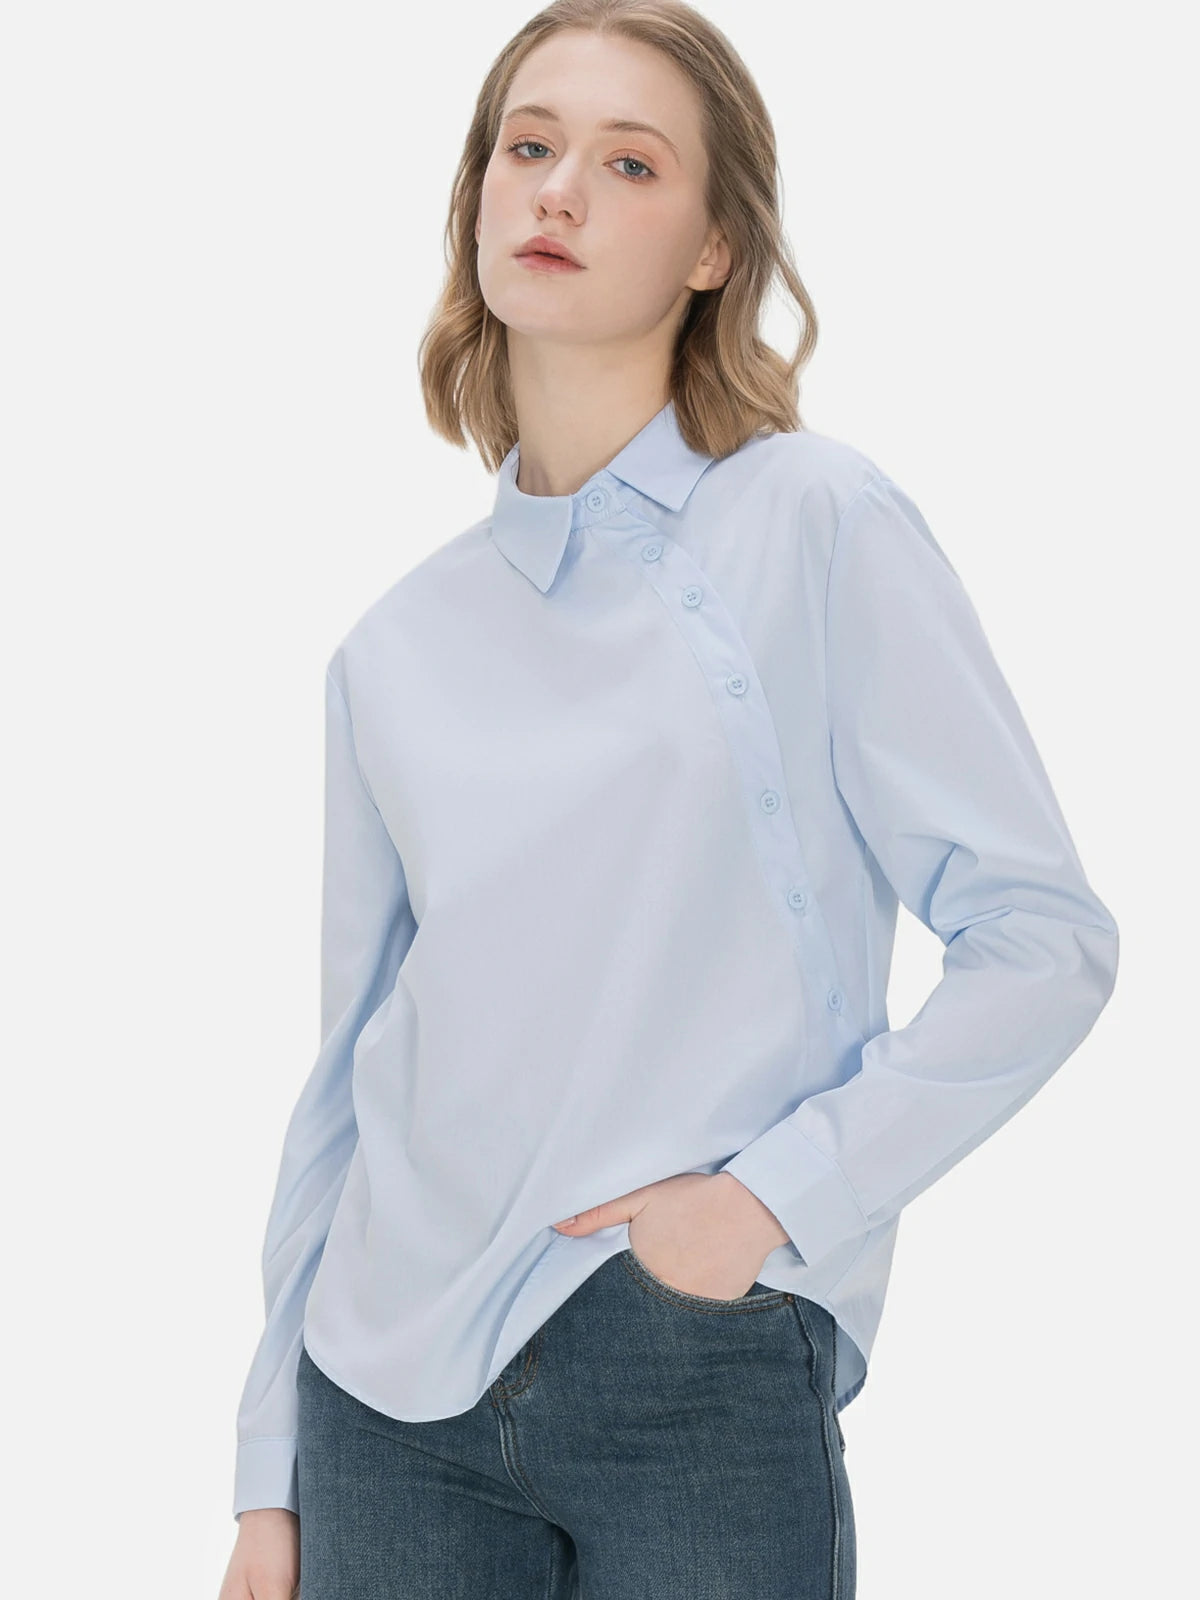 Tailored fit ladies&#39; shirt featuring a diagonal button design and timeless blue color, offering a comfortable and refined option for both formal and casual settings.